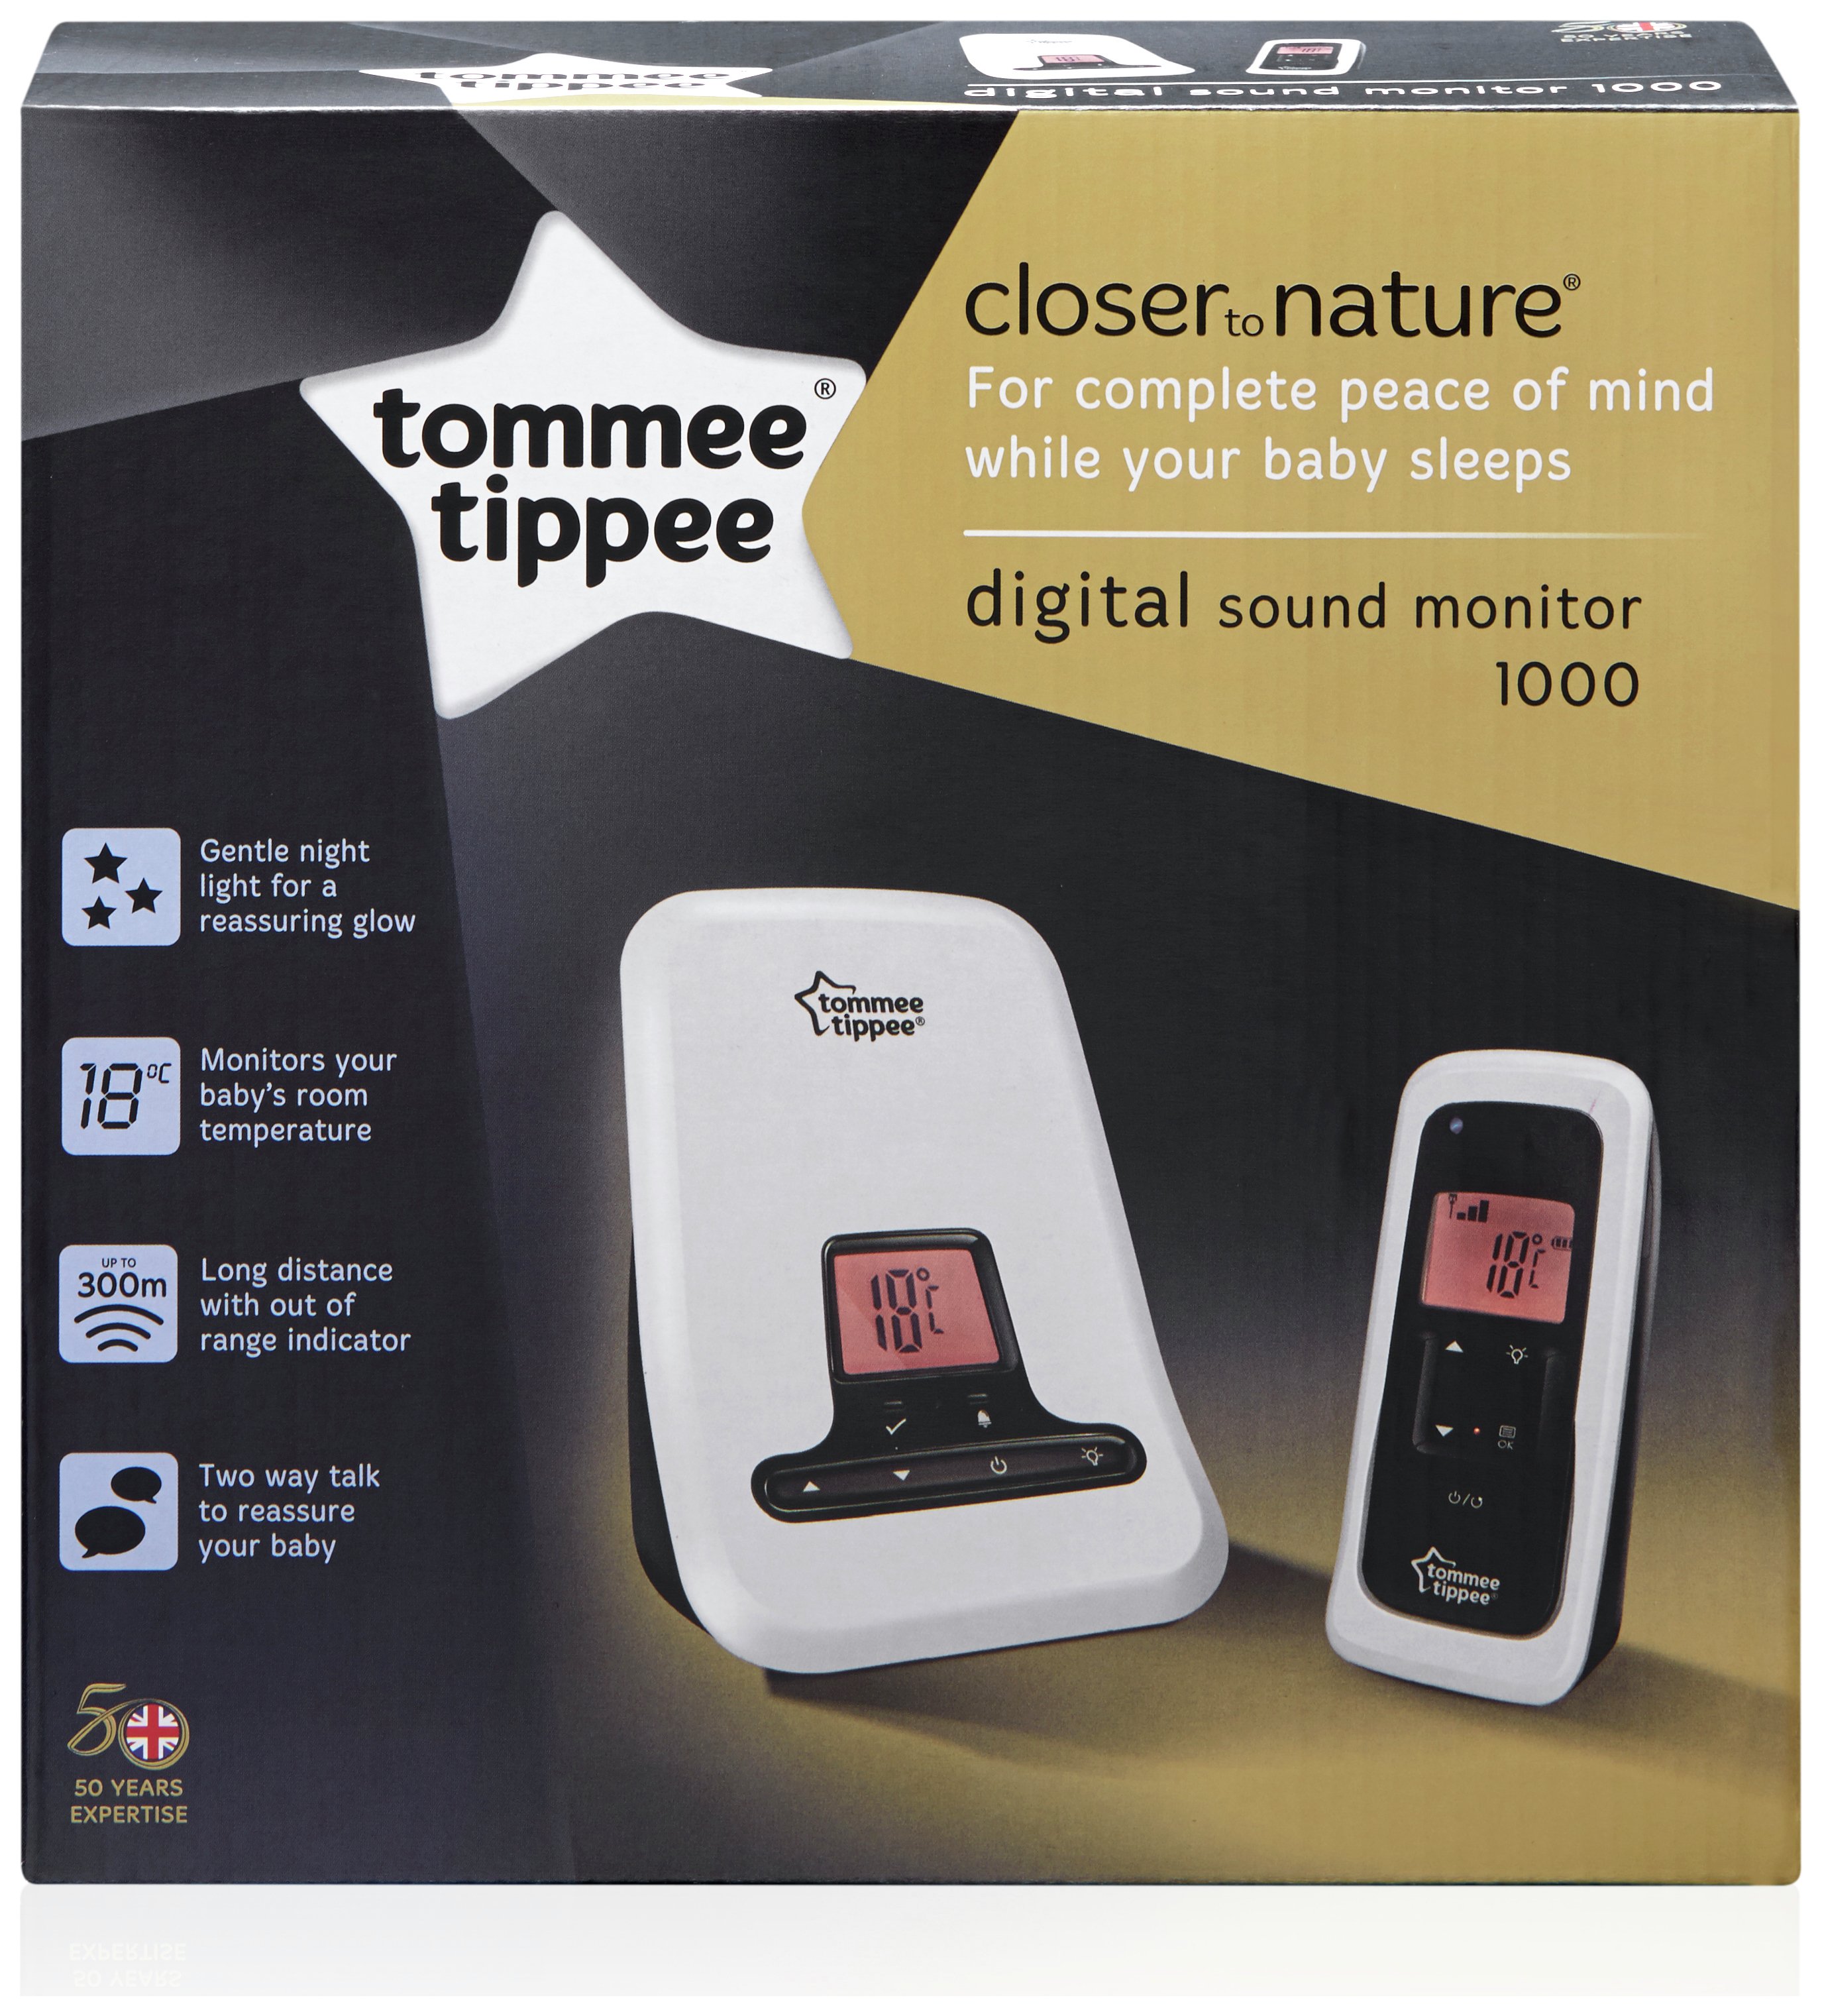 Tommee Tippee Closer to Nature DECT Digital Monitor